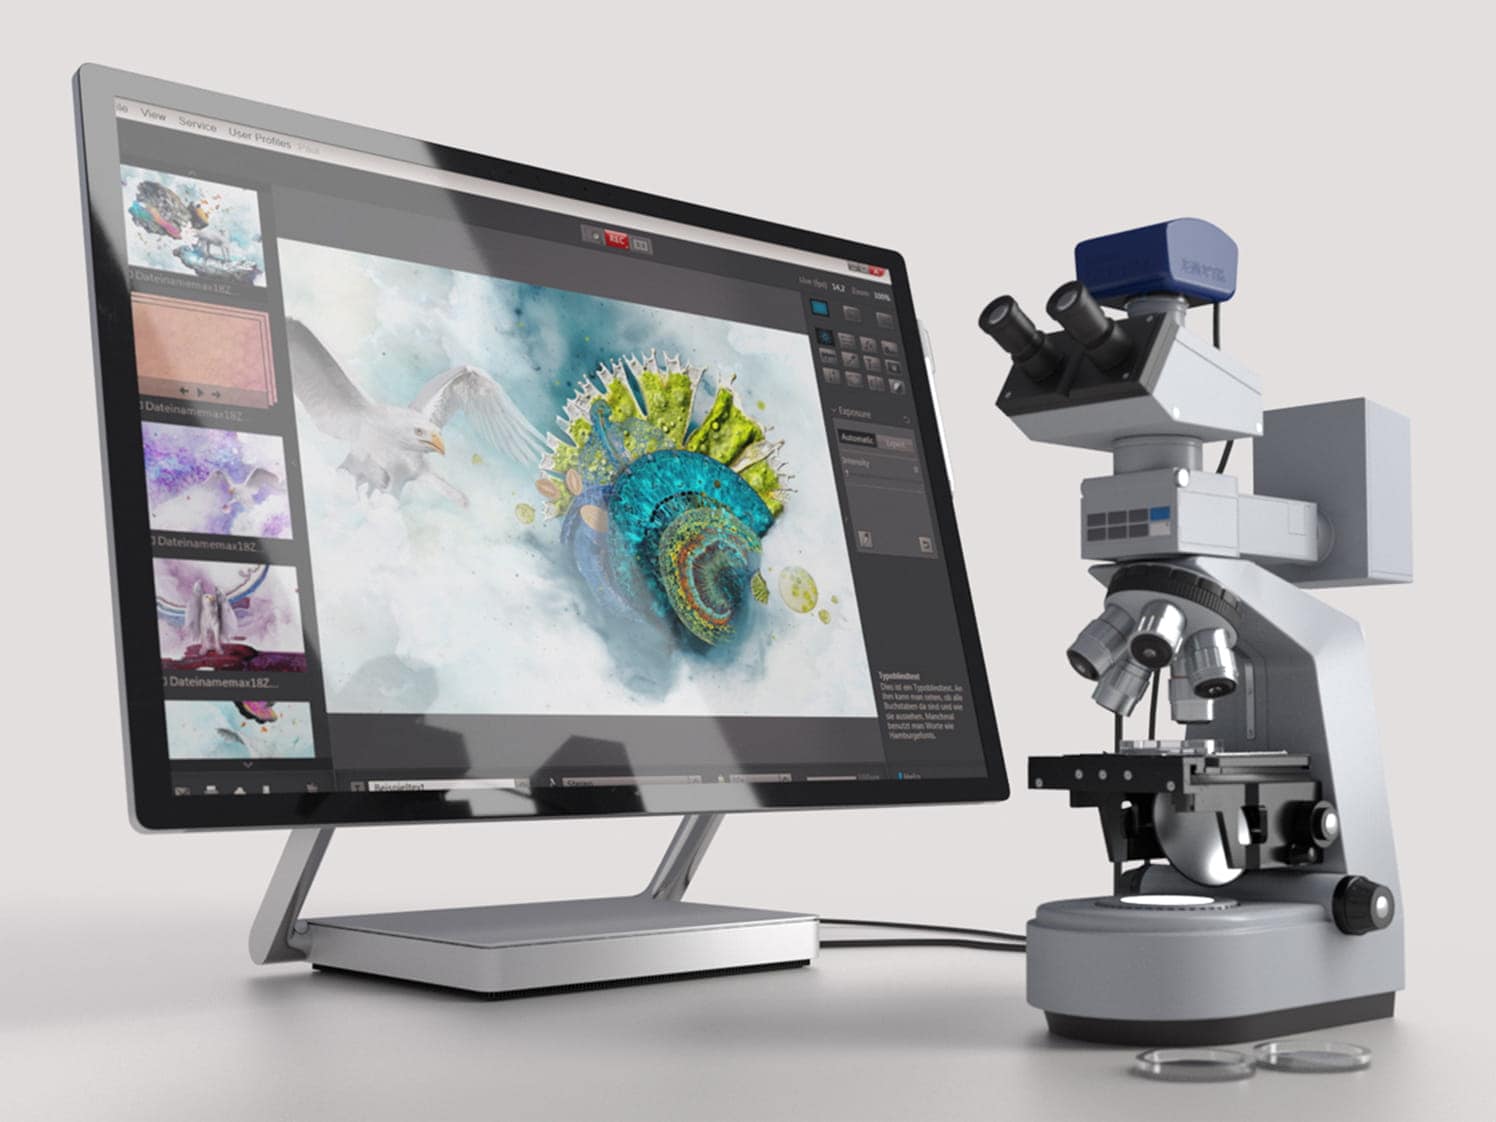 Microscope Manufacturers Companies In Taiwan Mail - Key Microscope Specs Guide Buying Decisions ...